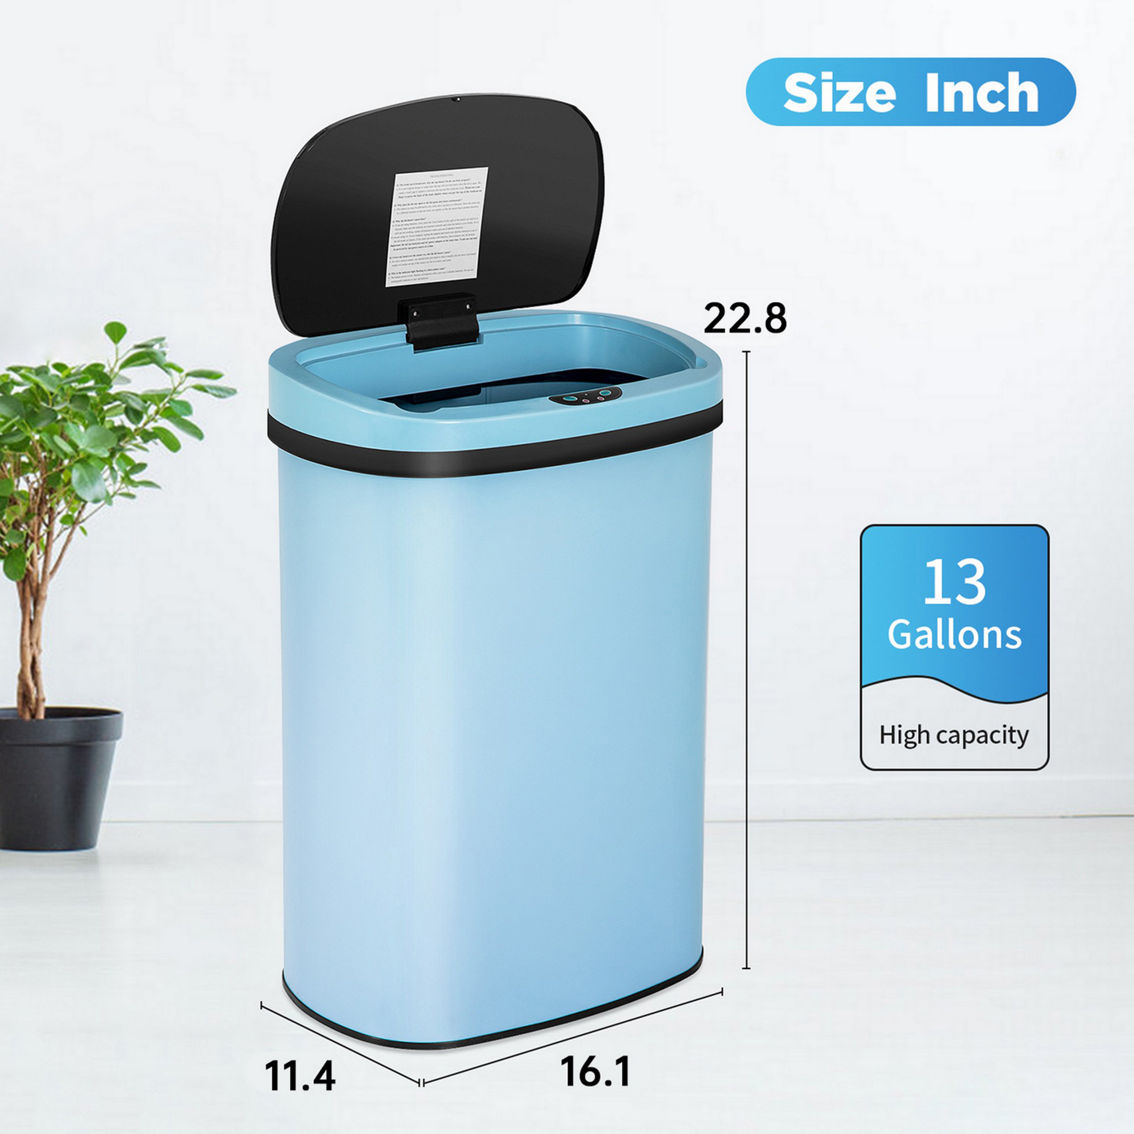 Furniture of America Vennicle Steel 13 gal. Touchless Motion Sensor Trash Can - Image 3 of 6